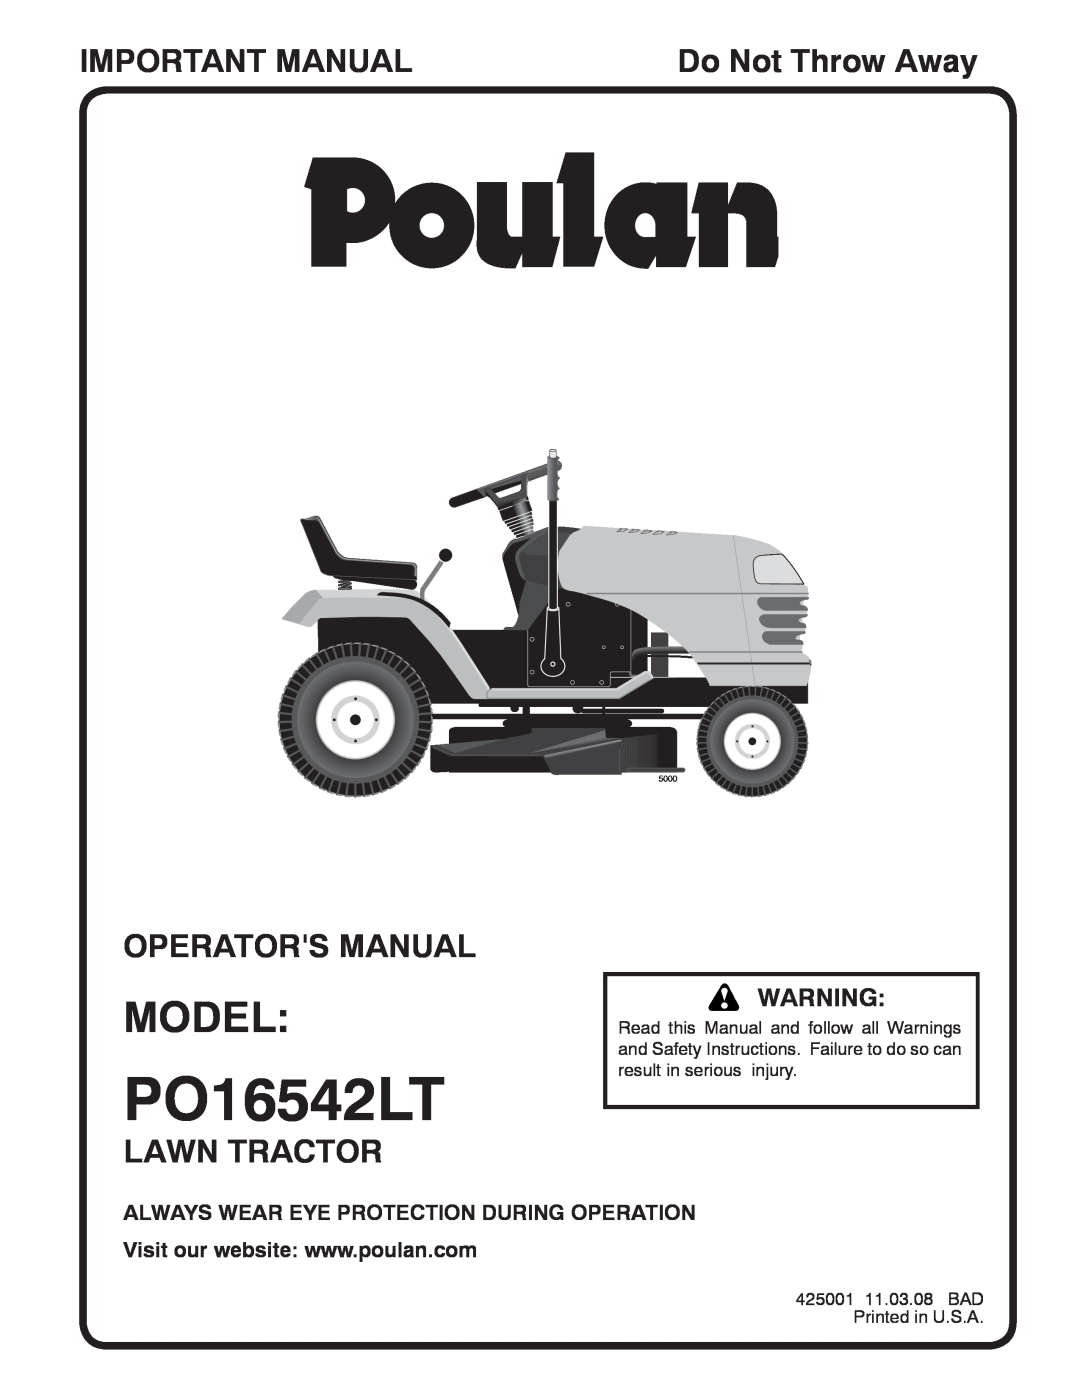 Poulan 425001 manual Model, Important Manual, Operators Manual, Lawn Tractor, Do Not Throw Away, PO16542LT, 5000 